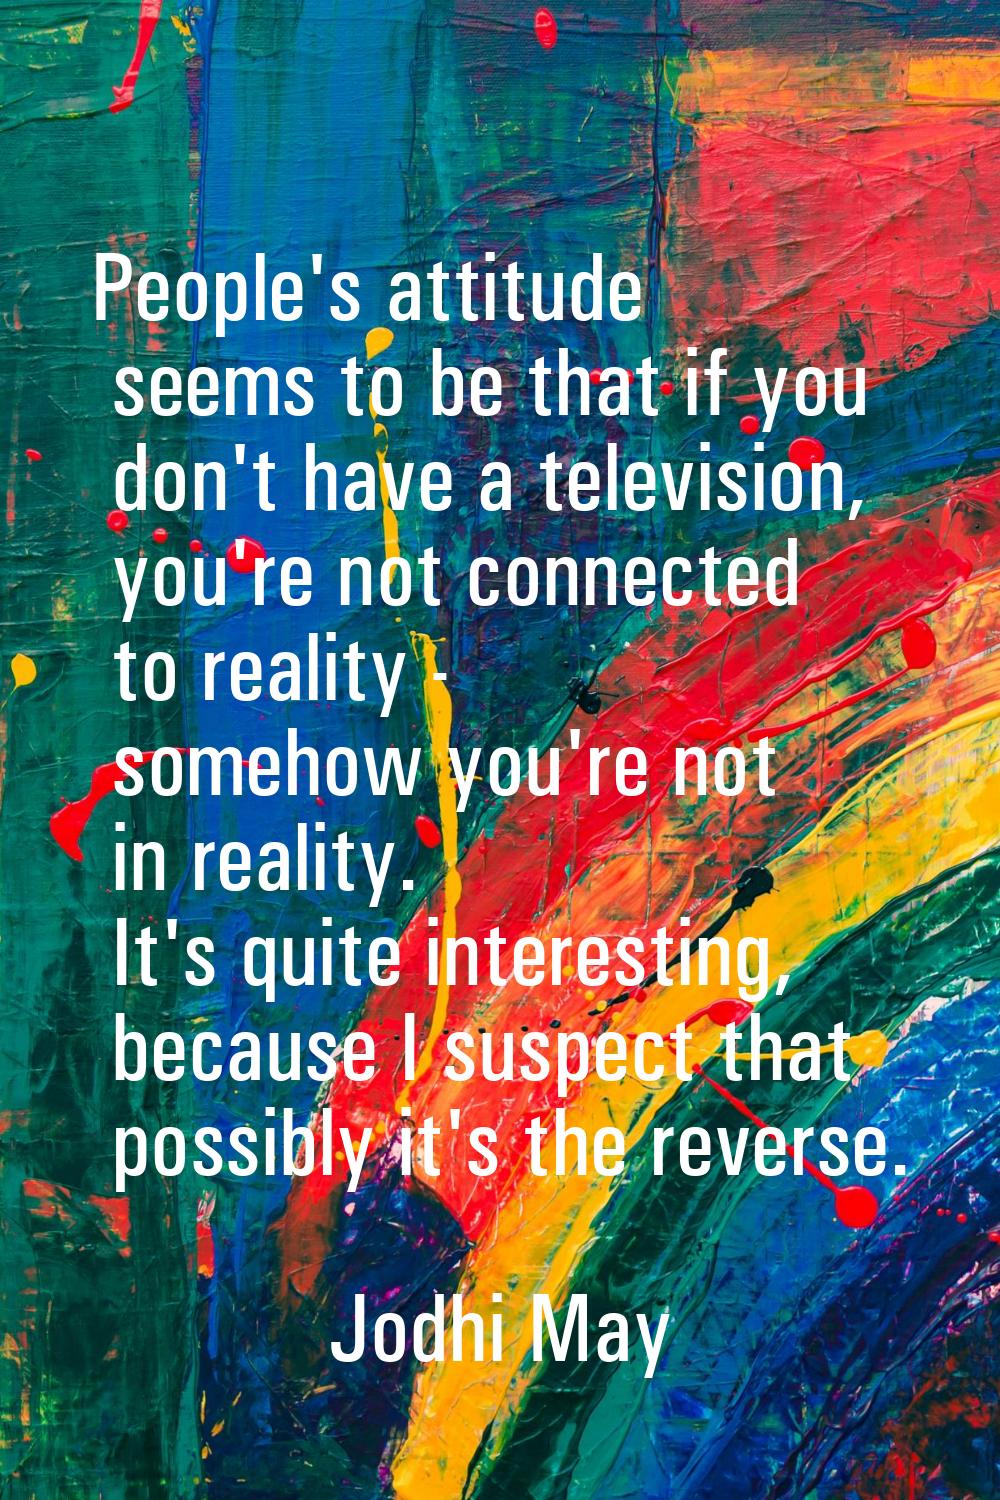 People's attitude seems to be that if you don't have a television, you're not connected to reality 